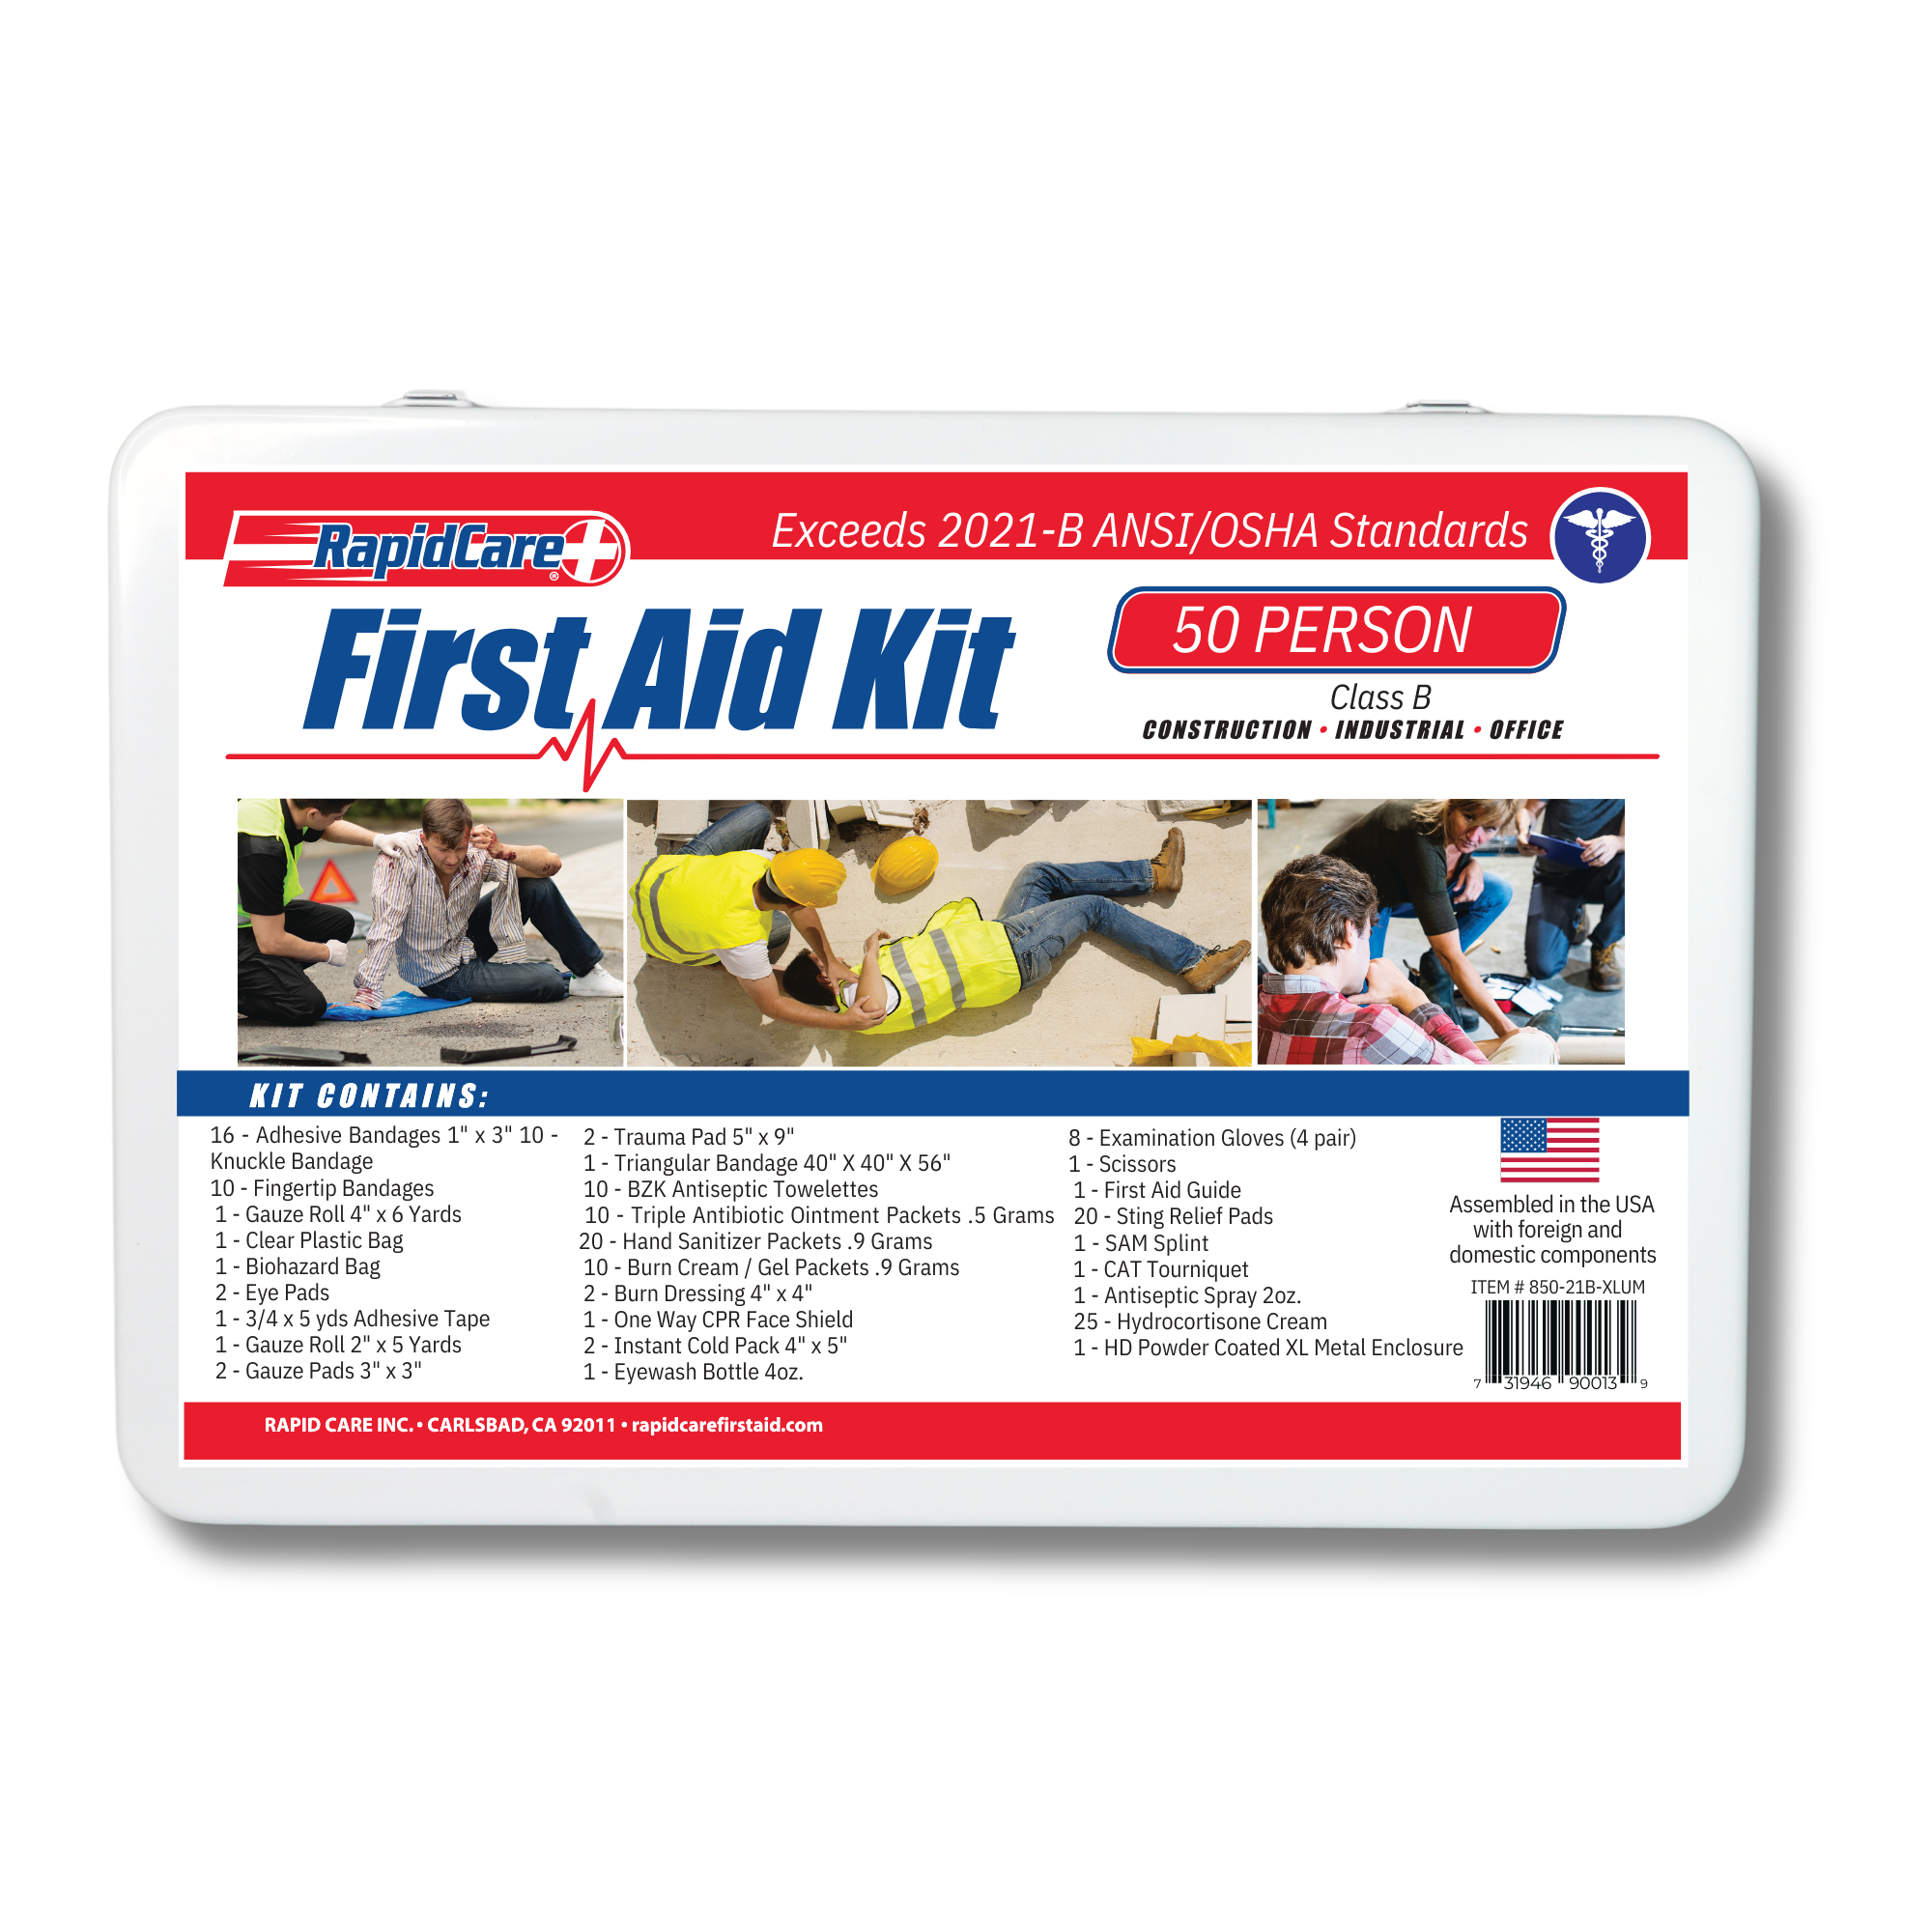 Extra Large 50 Person Unitized Metal First Aid Kit - 2021-B